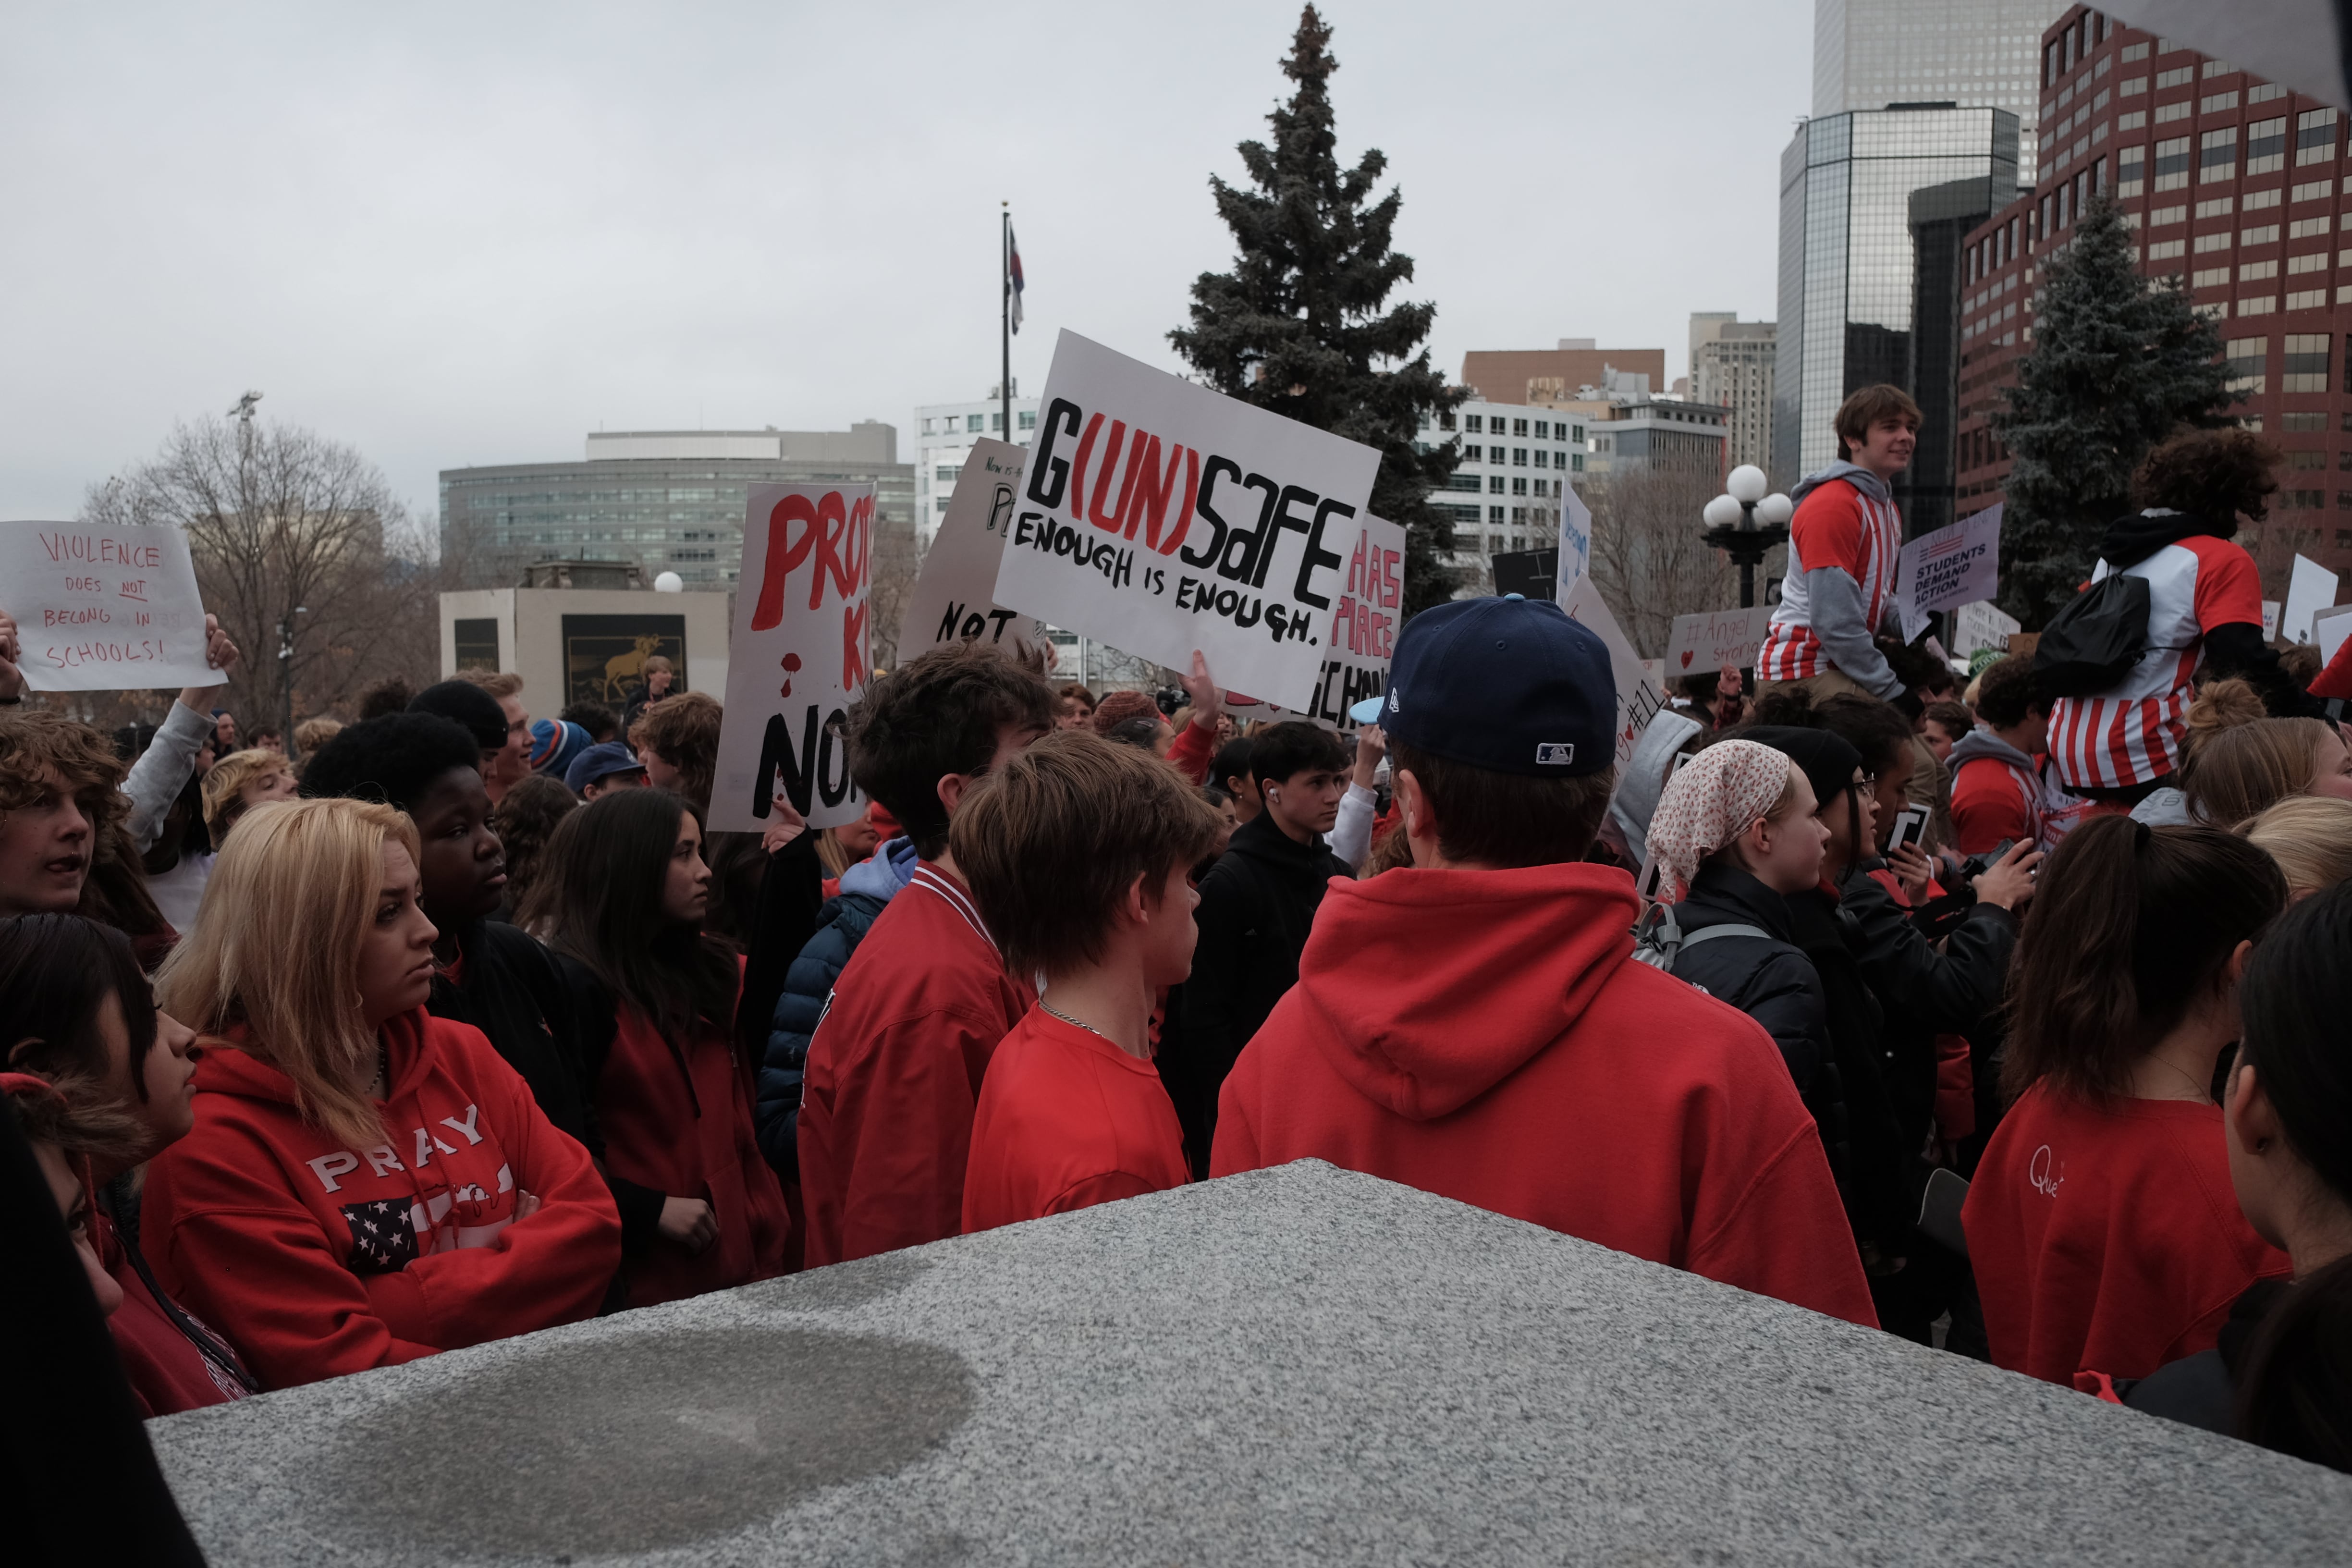 High school students dressed in red gather in front of the Colorado State Capitol. One sign emerges from the crowd reading “G(UN)SAFE Enough is Enough.” Downtown office buildings can be seen in the background.